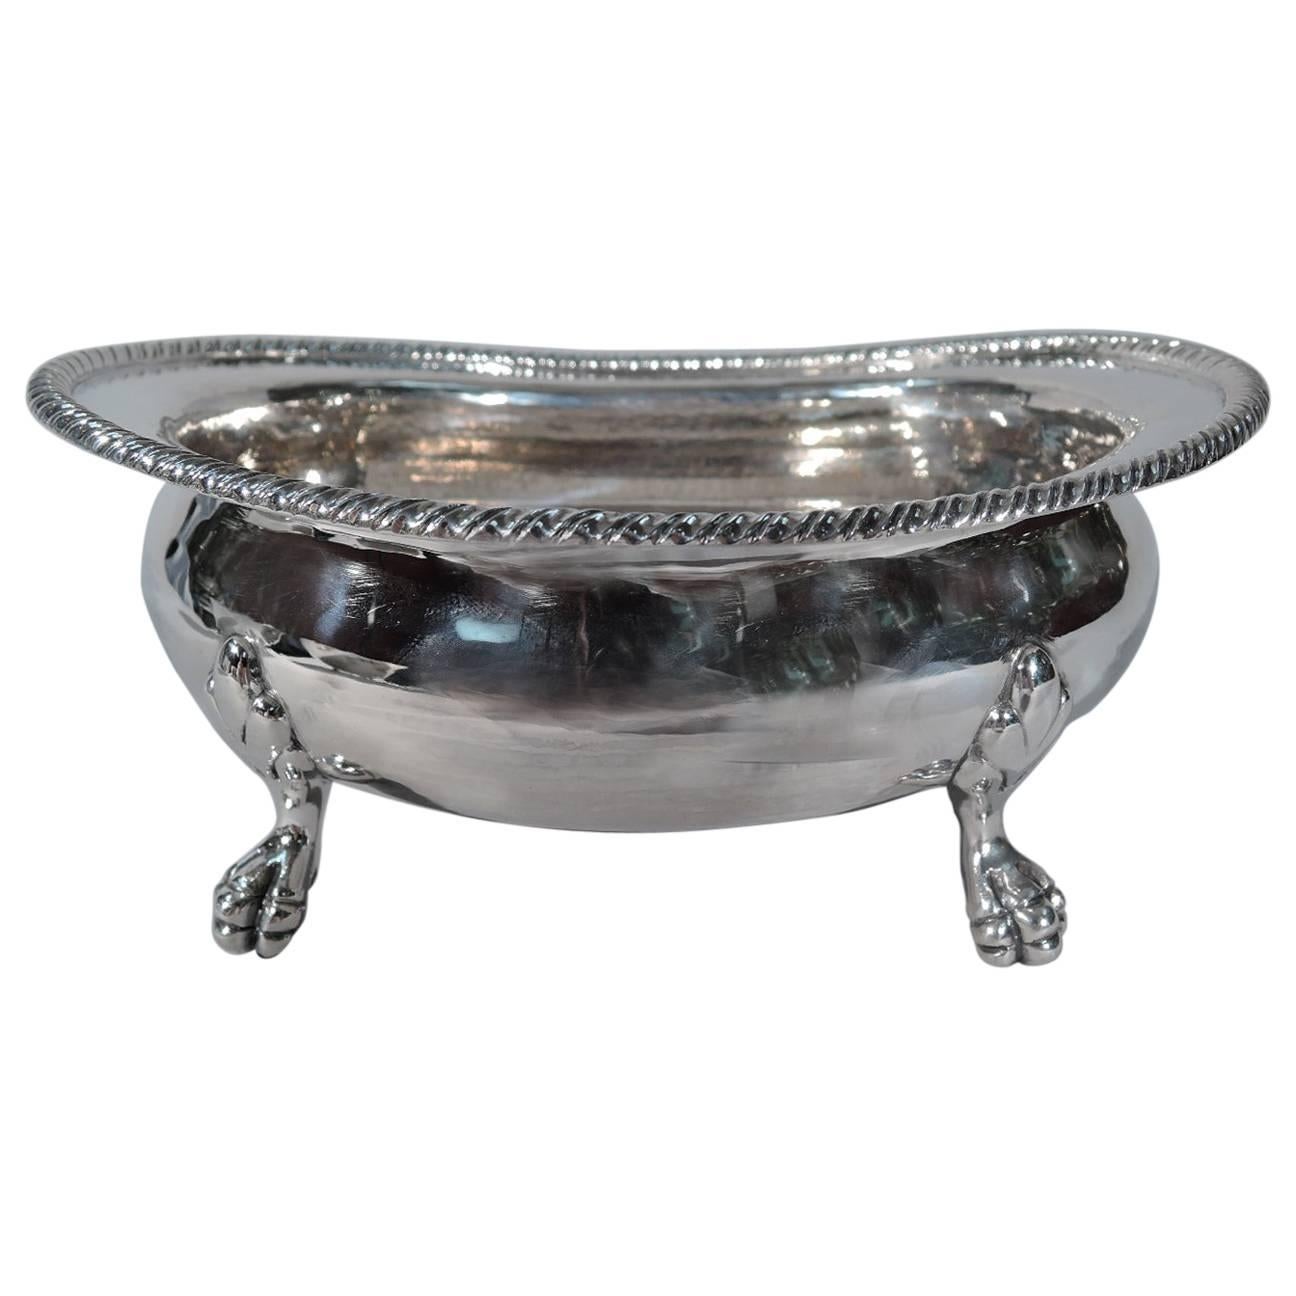 Buccellati Hand-Hammered Sterling Silver Bowl with Claw Feet